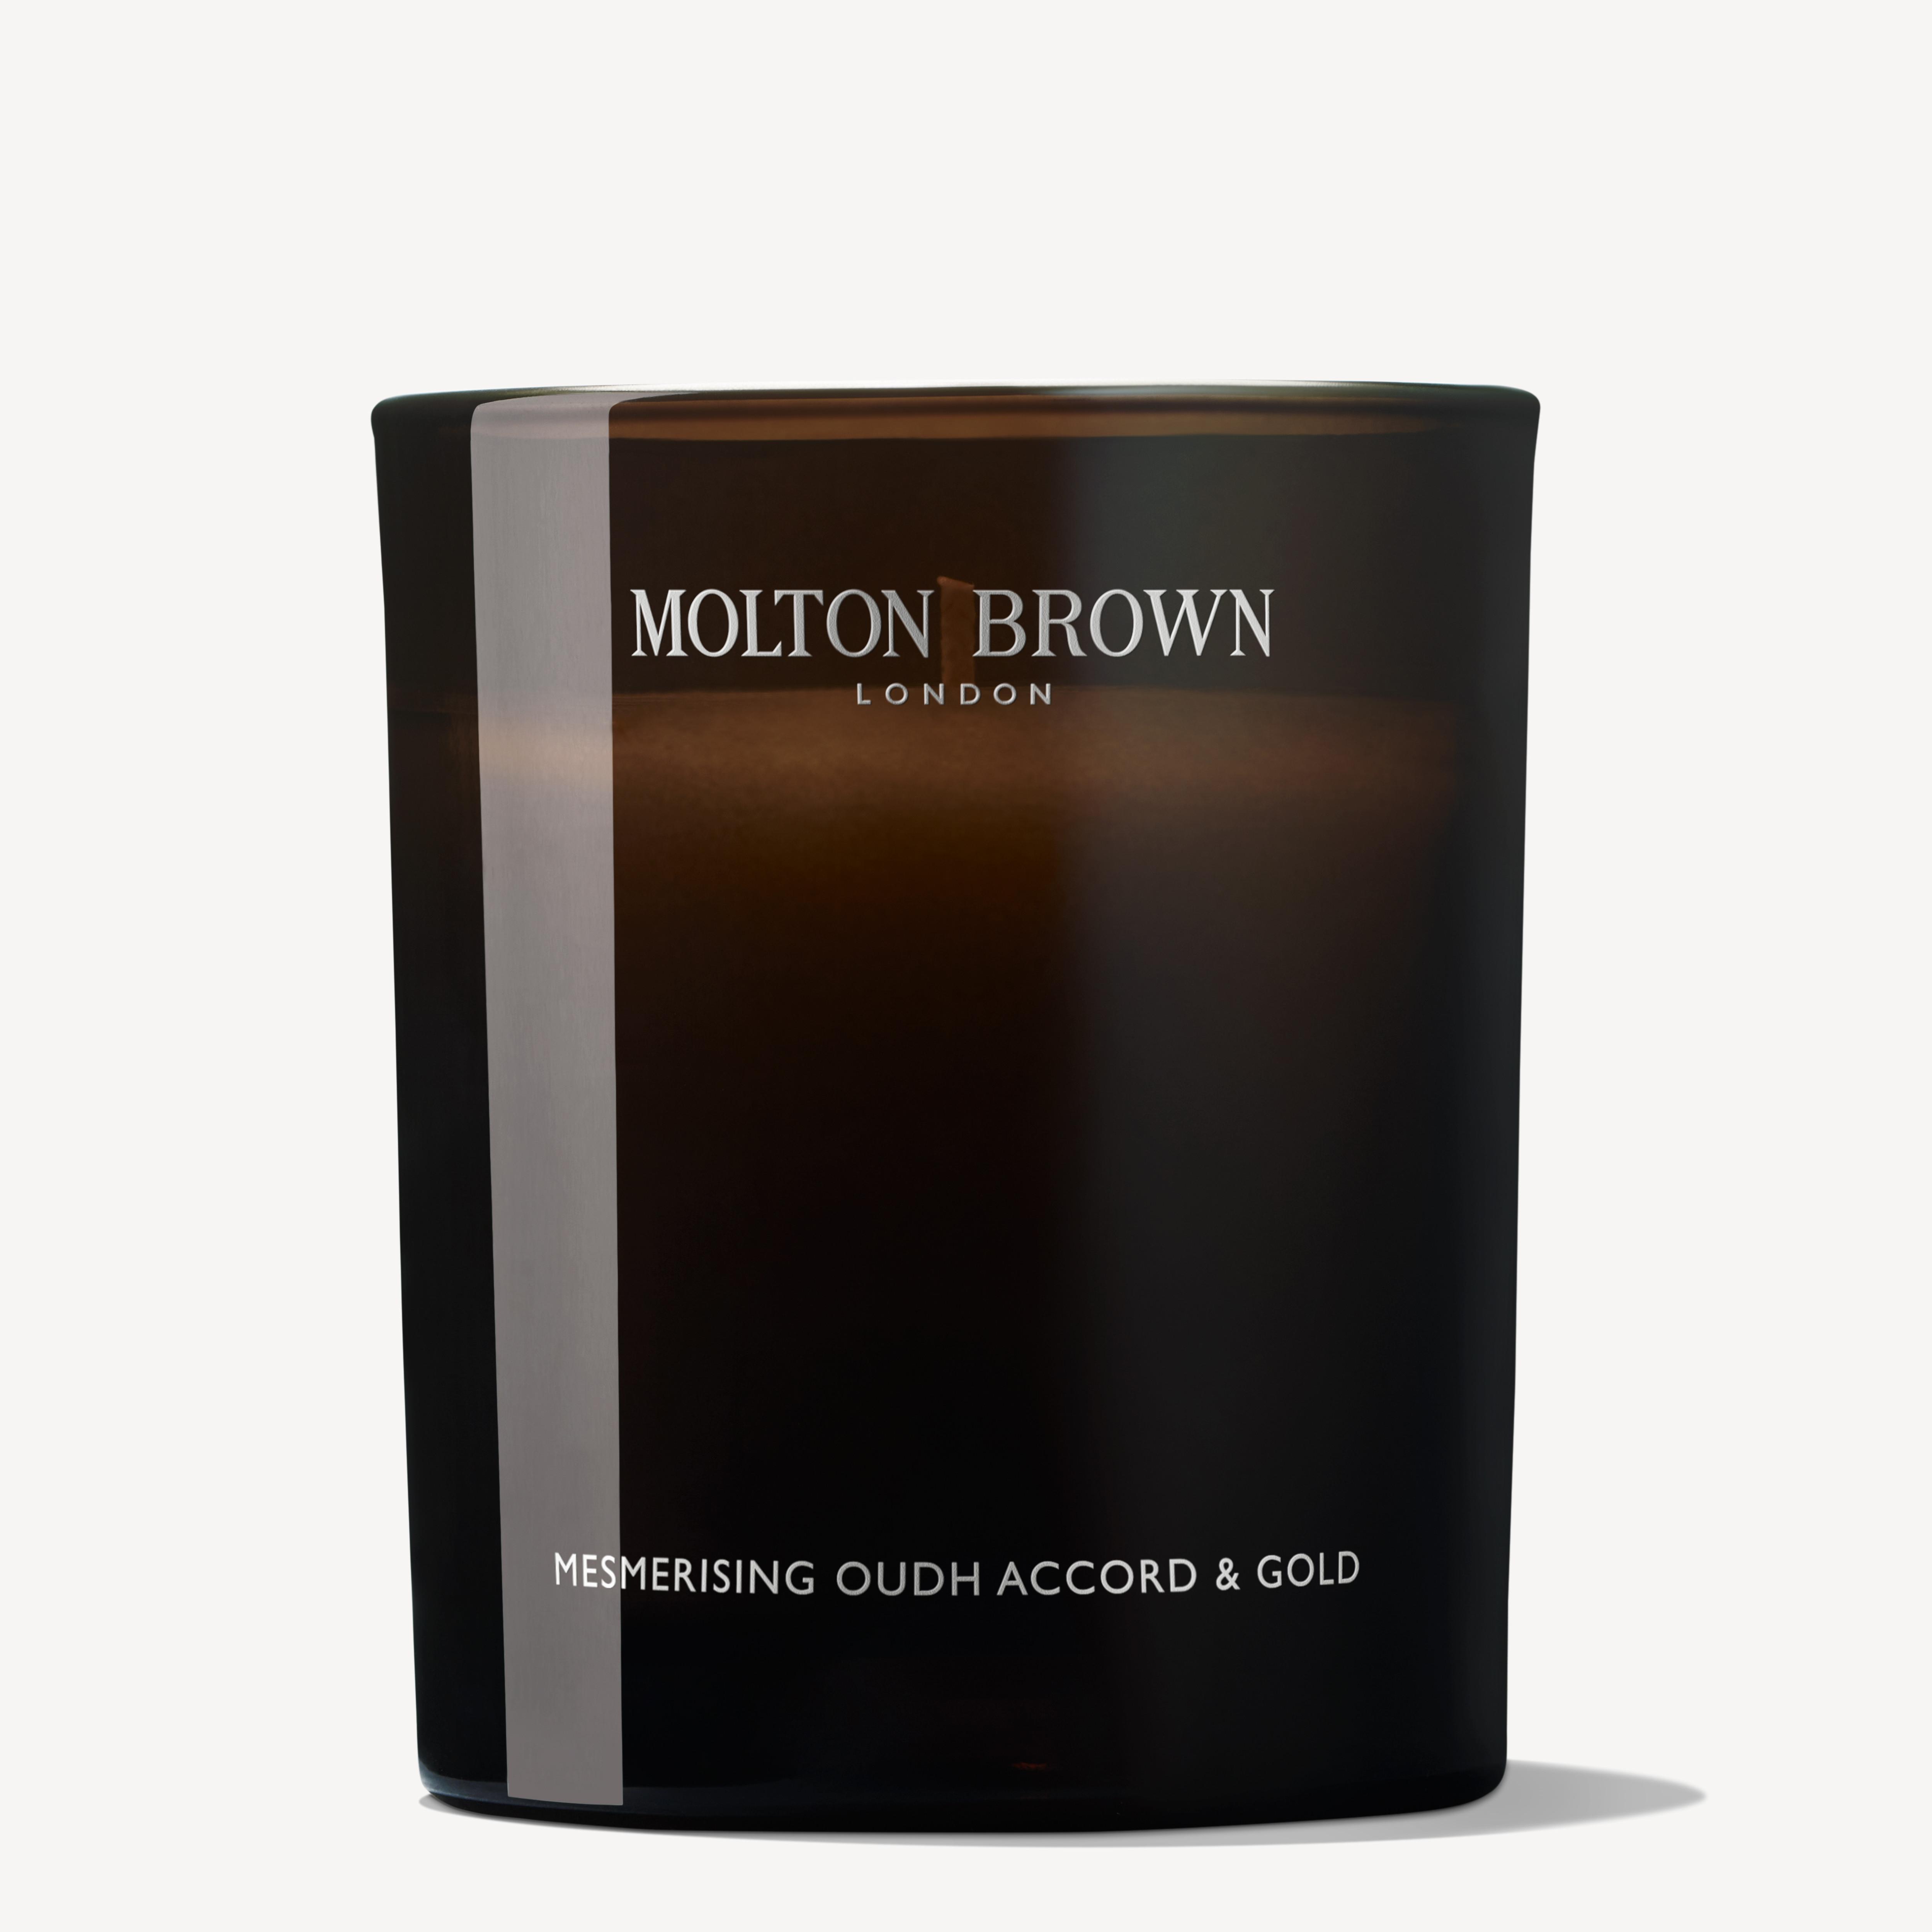 Molton Brown Mesmerising Oudh Accord & Gold Signature Candle 190g